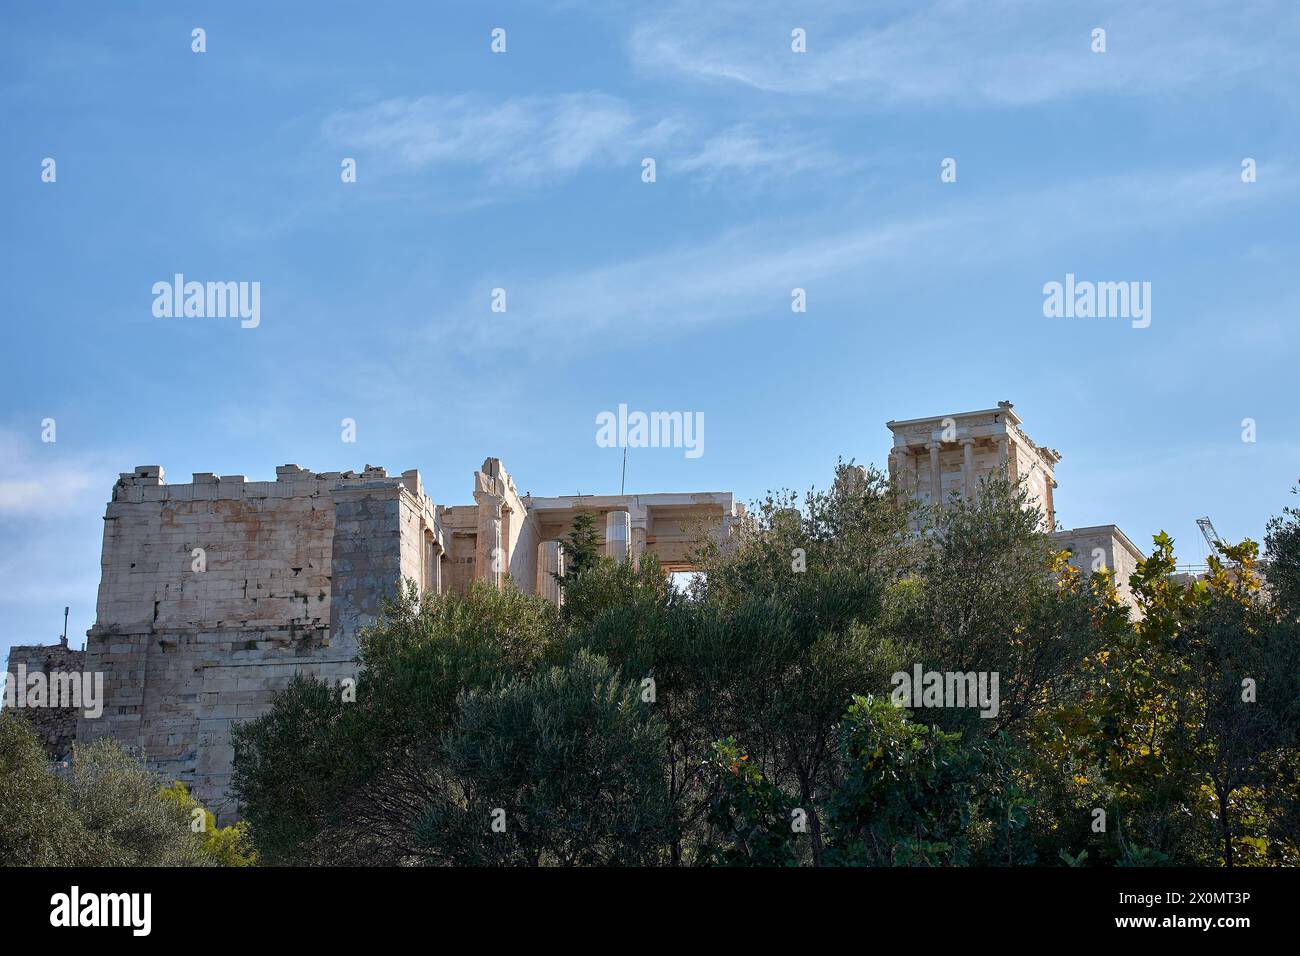 General view of the Parthenon and the ancient Acropolis of Athens Greece from a low area between trees Stock Photo